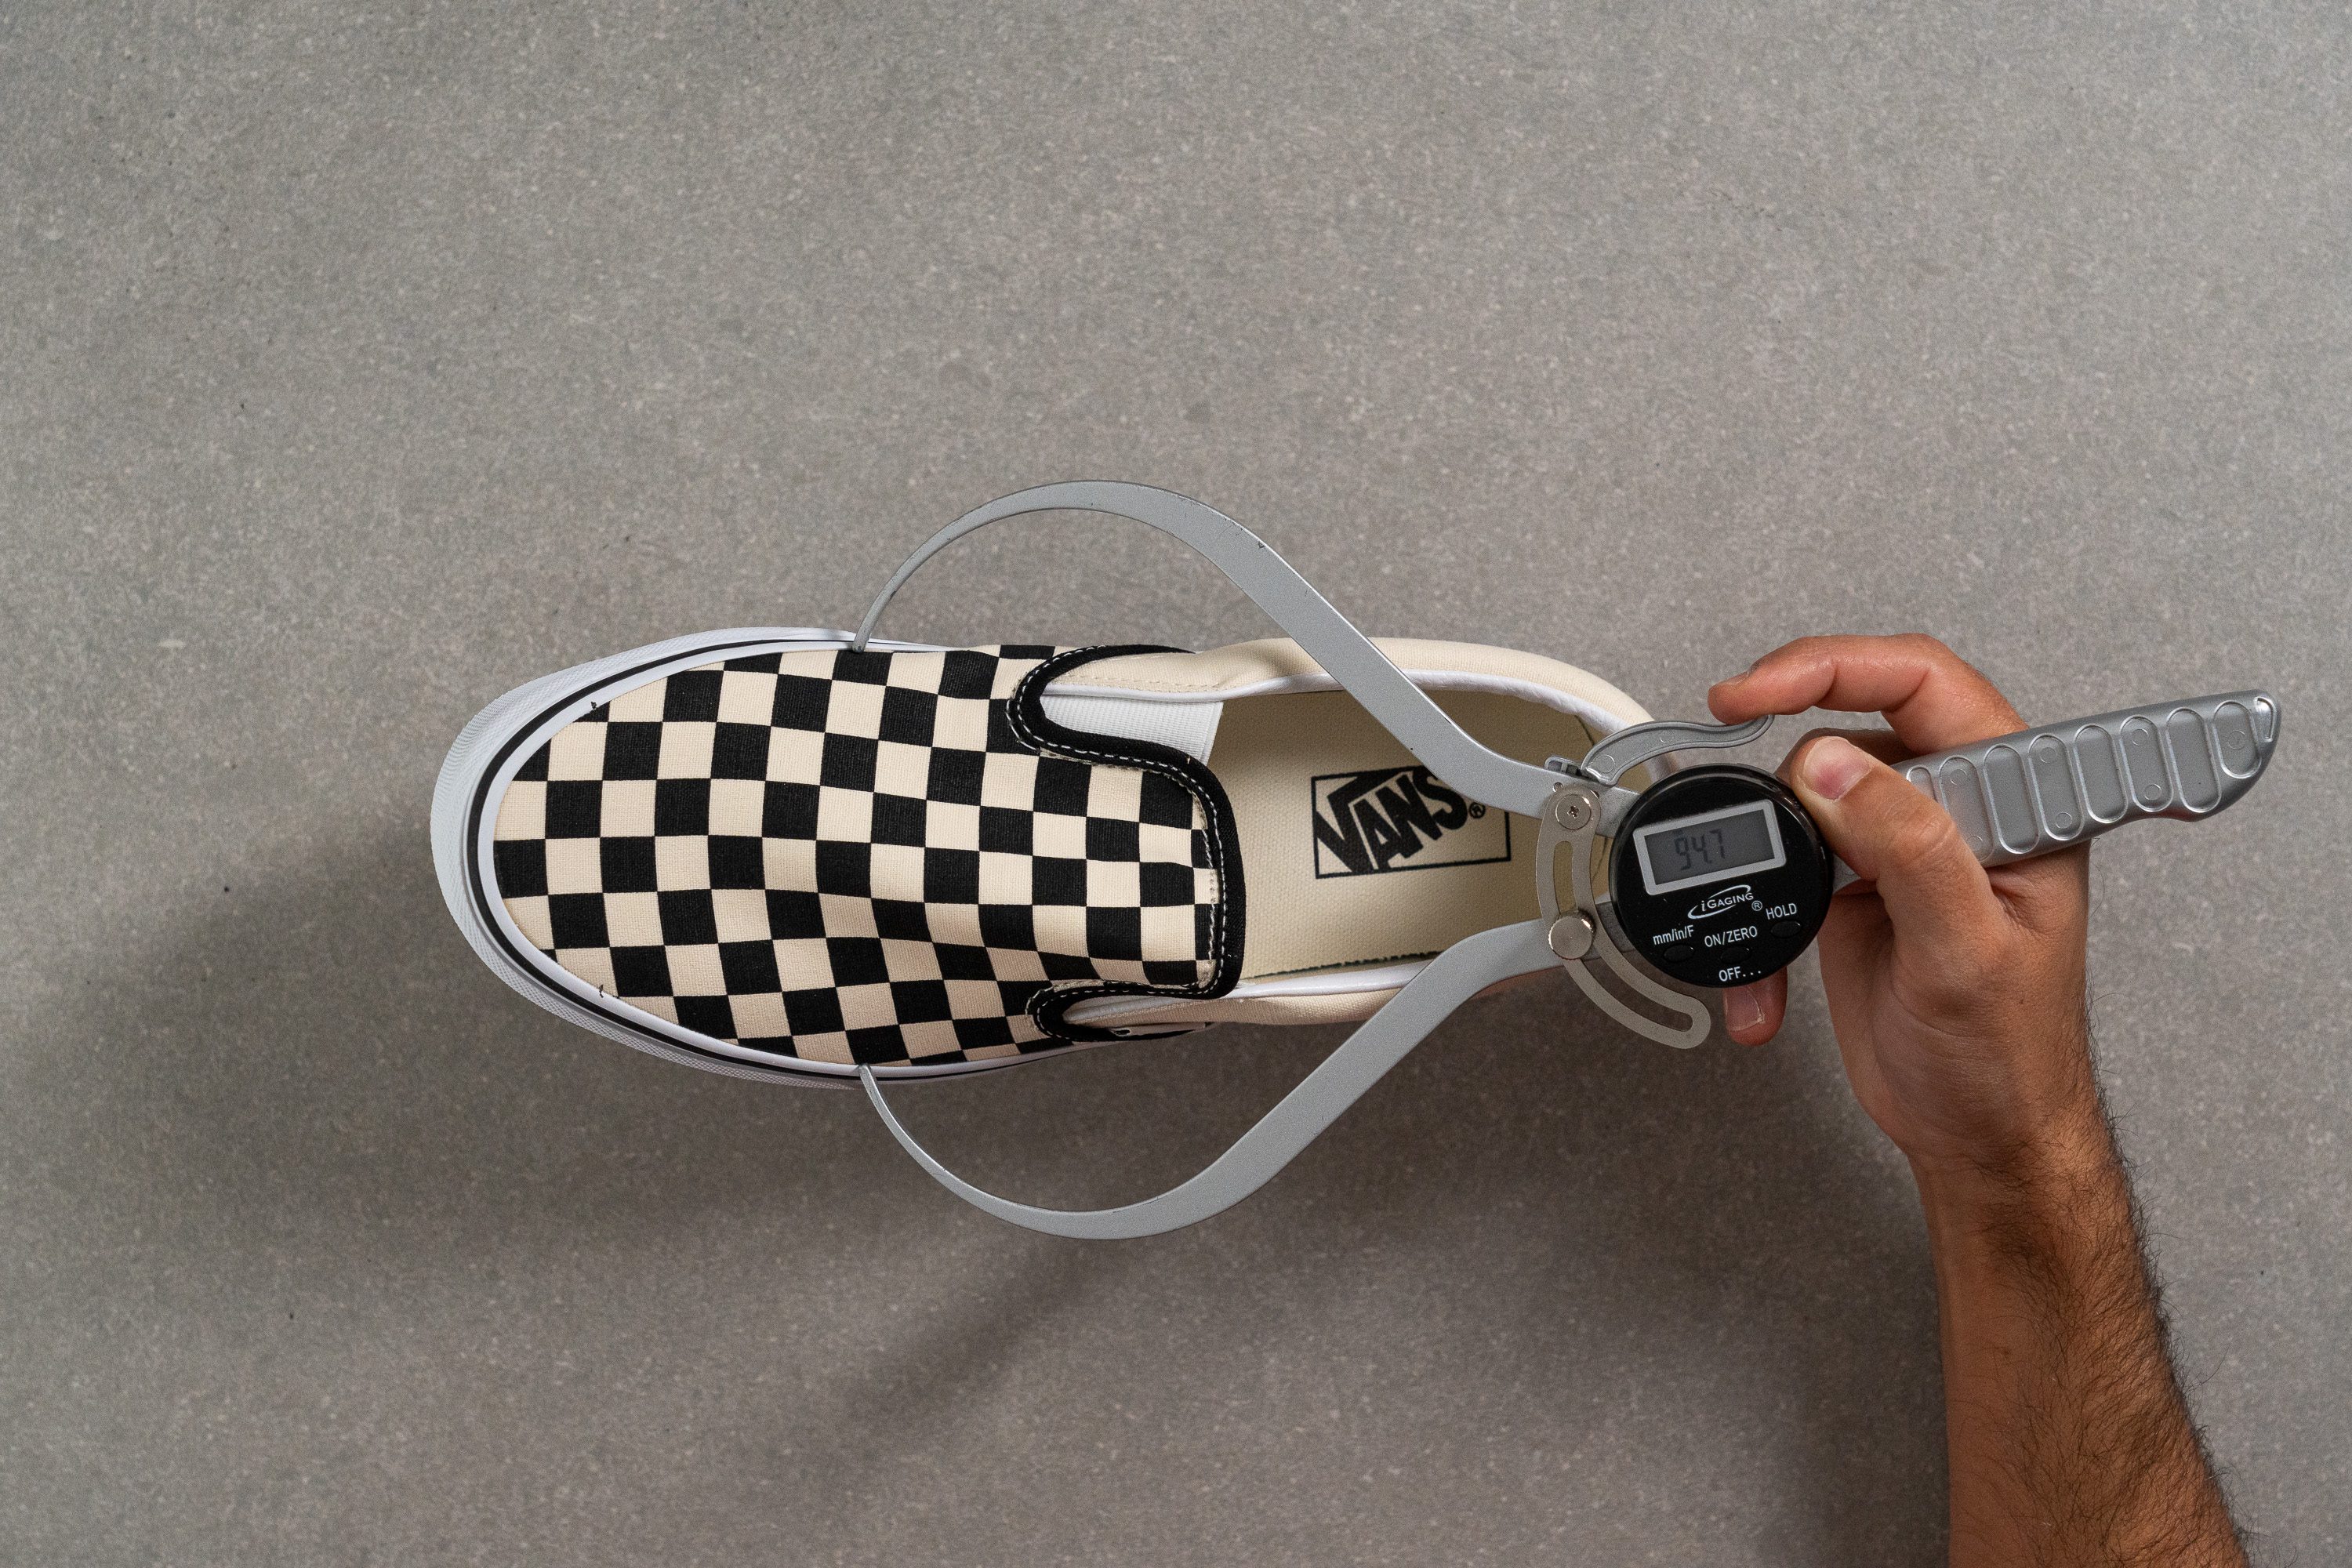 vans mid Slip-On Toebox width at the widest part